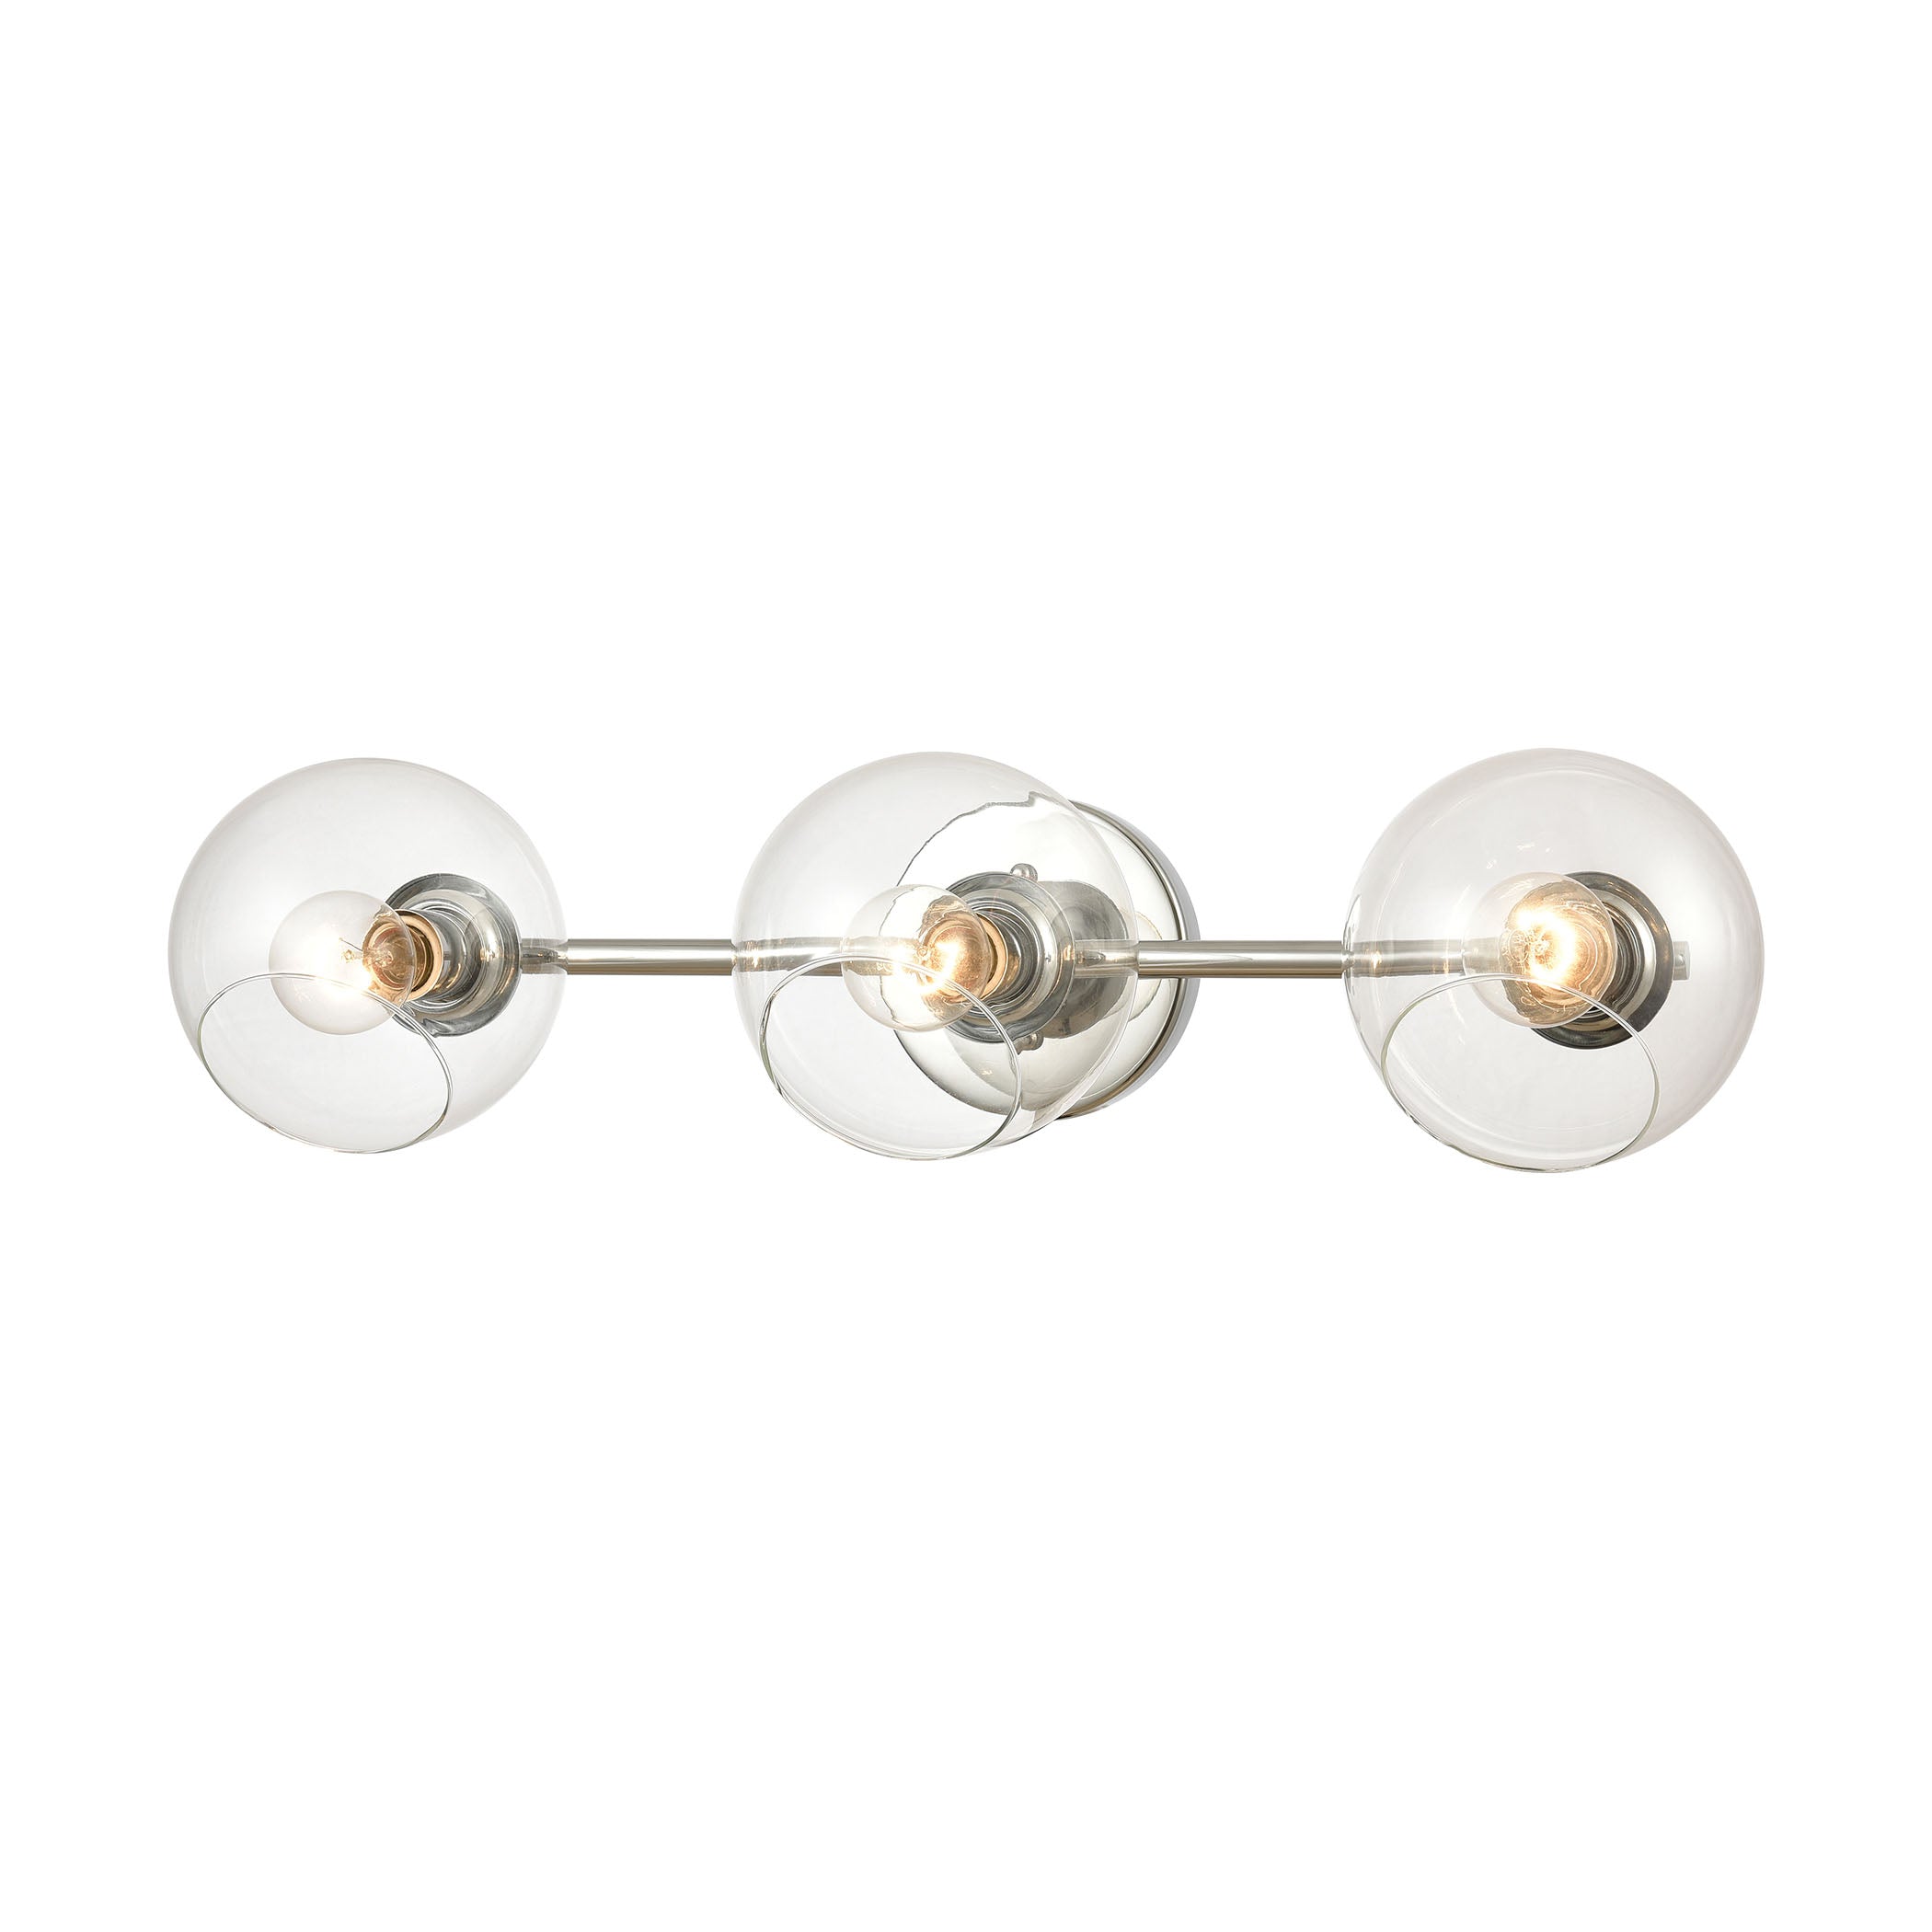 ELK Lighting 18375/3 Claro 3-Light Vanity Light in Polished Chrome with Clear Glass